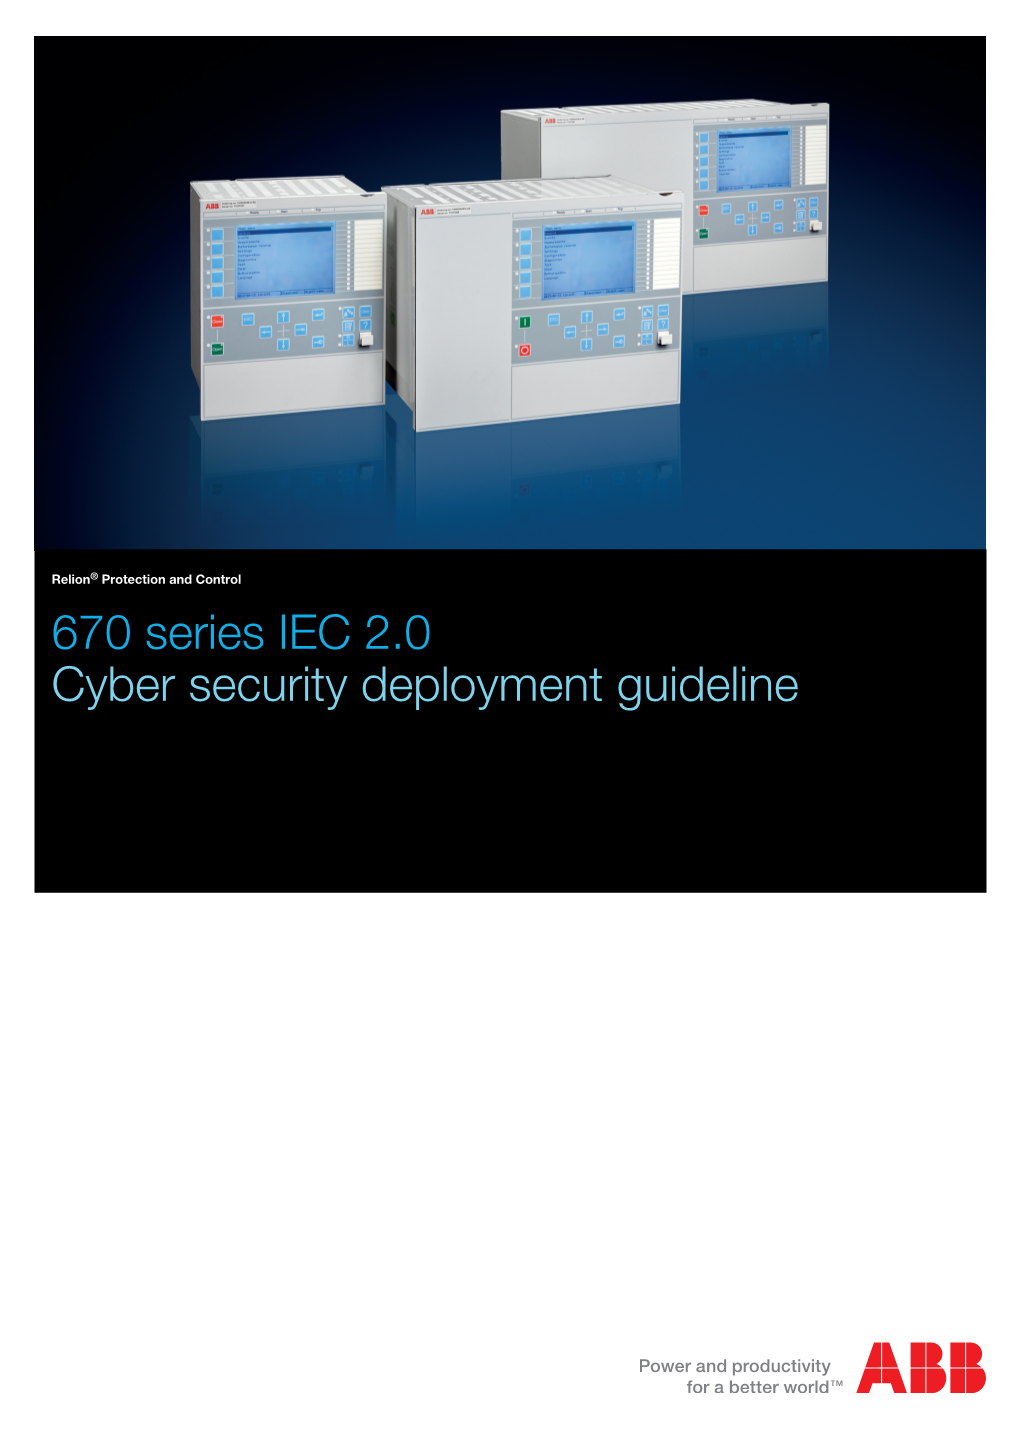 670 Series IEC 2.0 Cyber Security Deployment Guideline